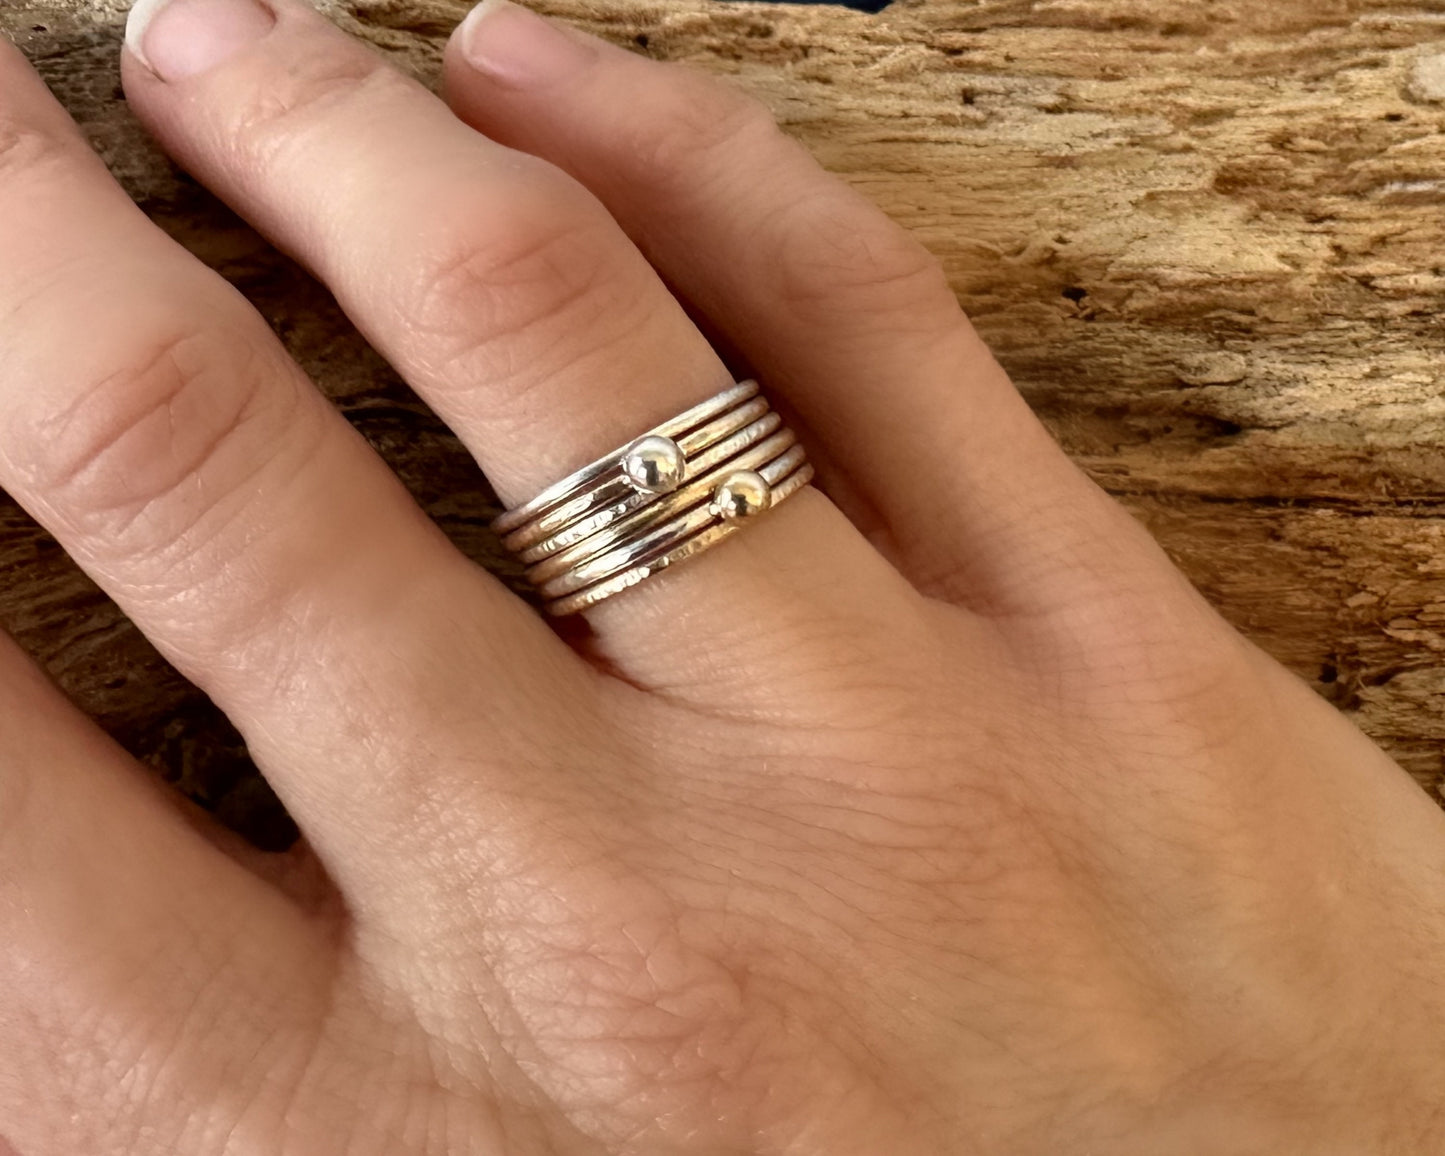 Set of Two Skinny 1.2mm 9ct Gold Rings, One Plain, One Ripple Hammered Pattern, Simple Minimalist Ring Band, Hadmade Gold Stacking Rings